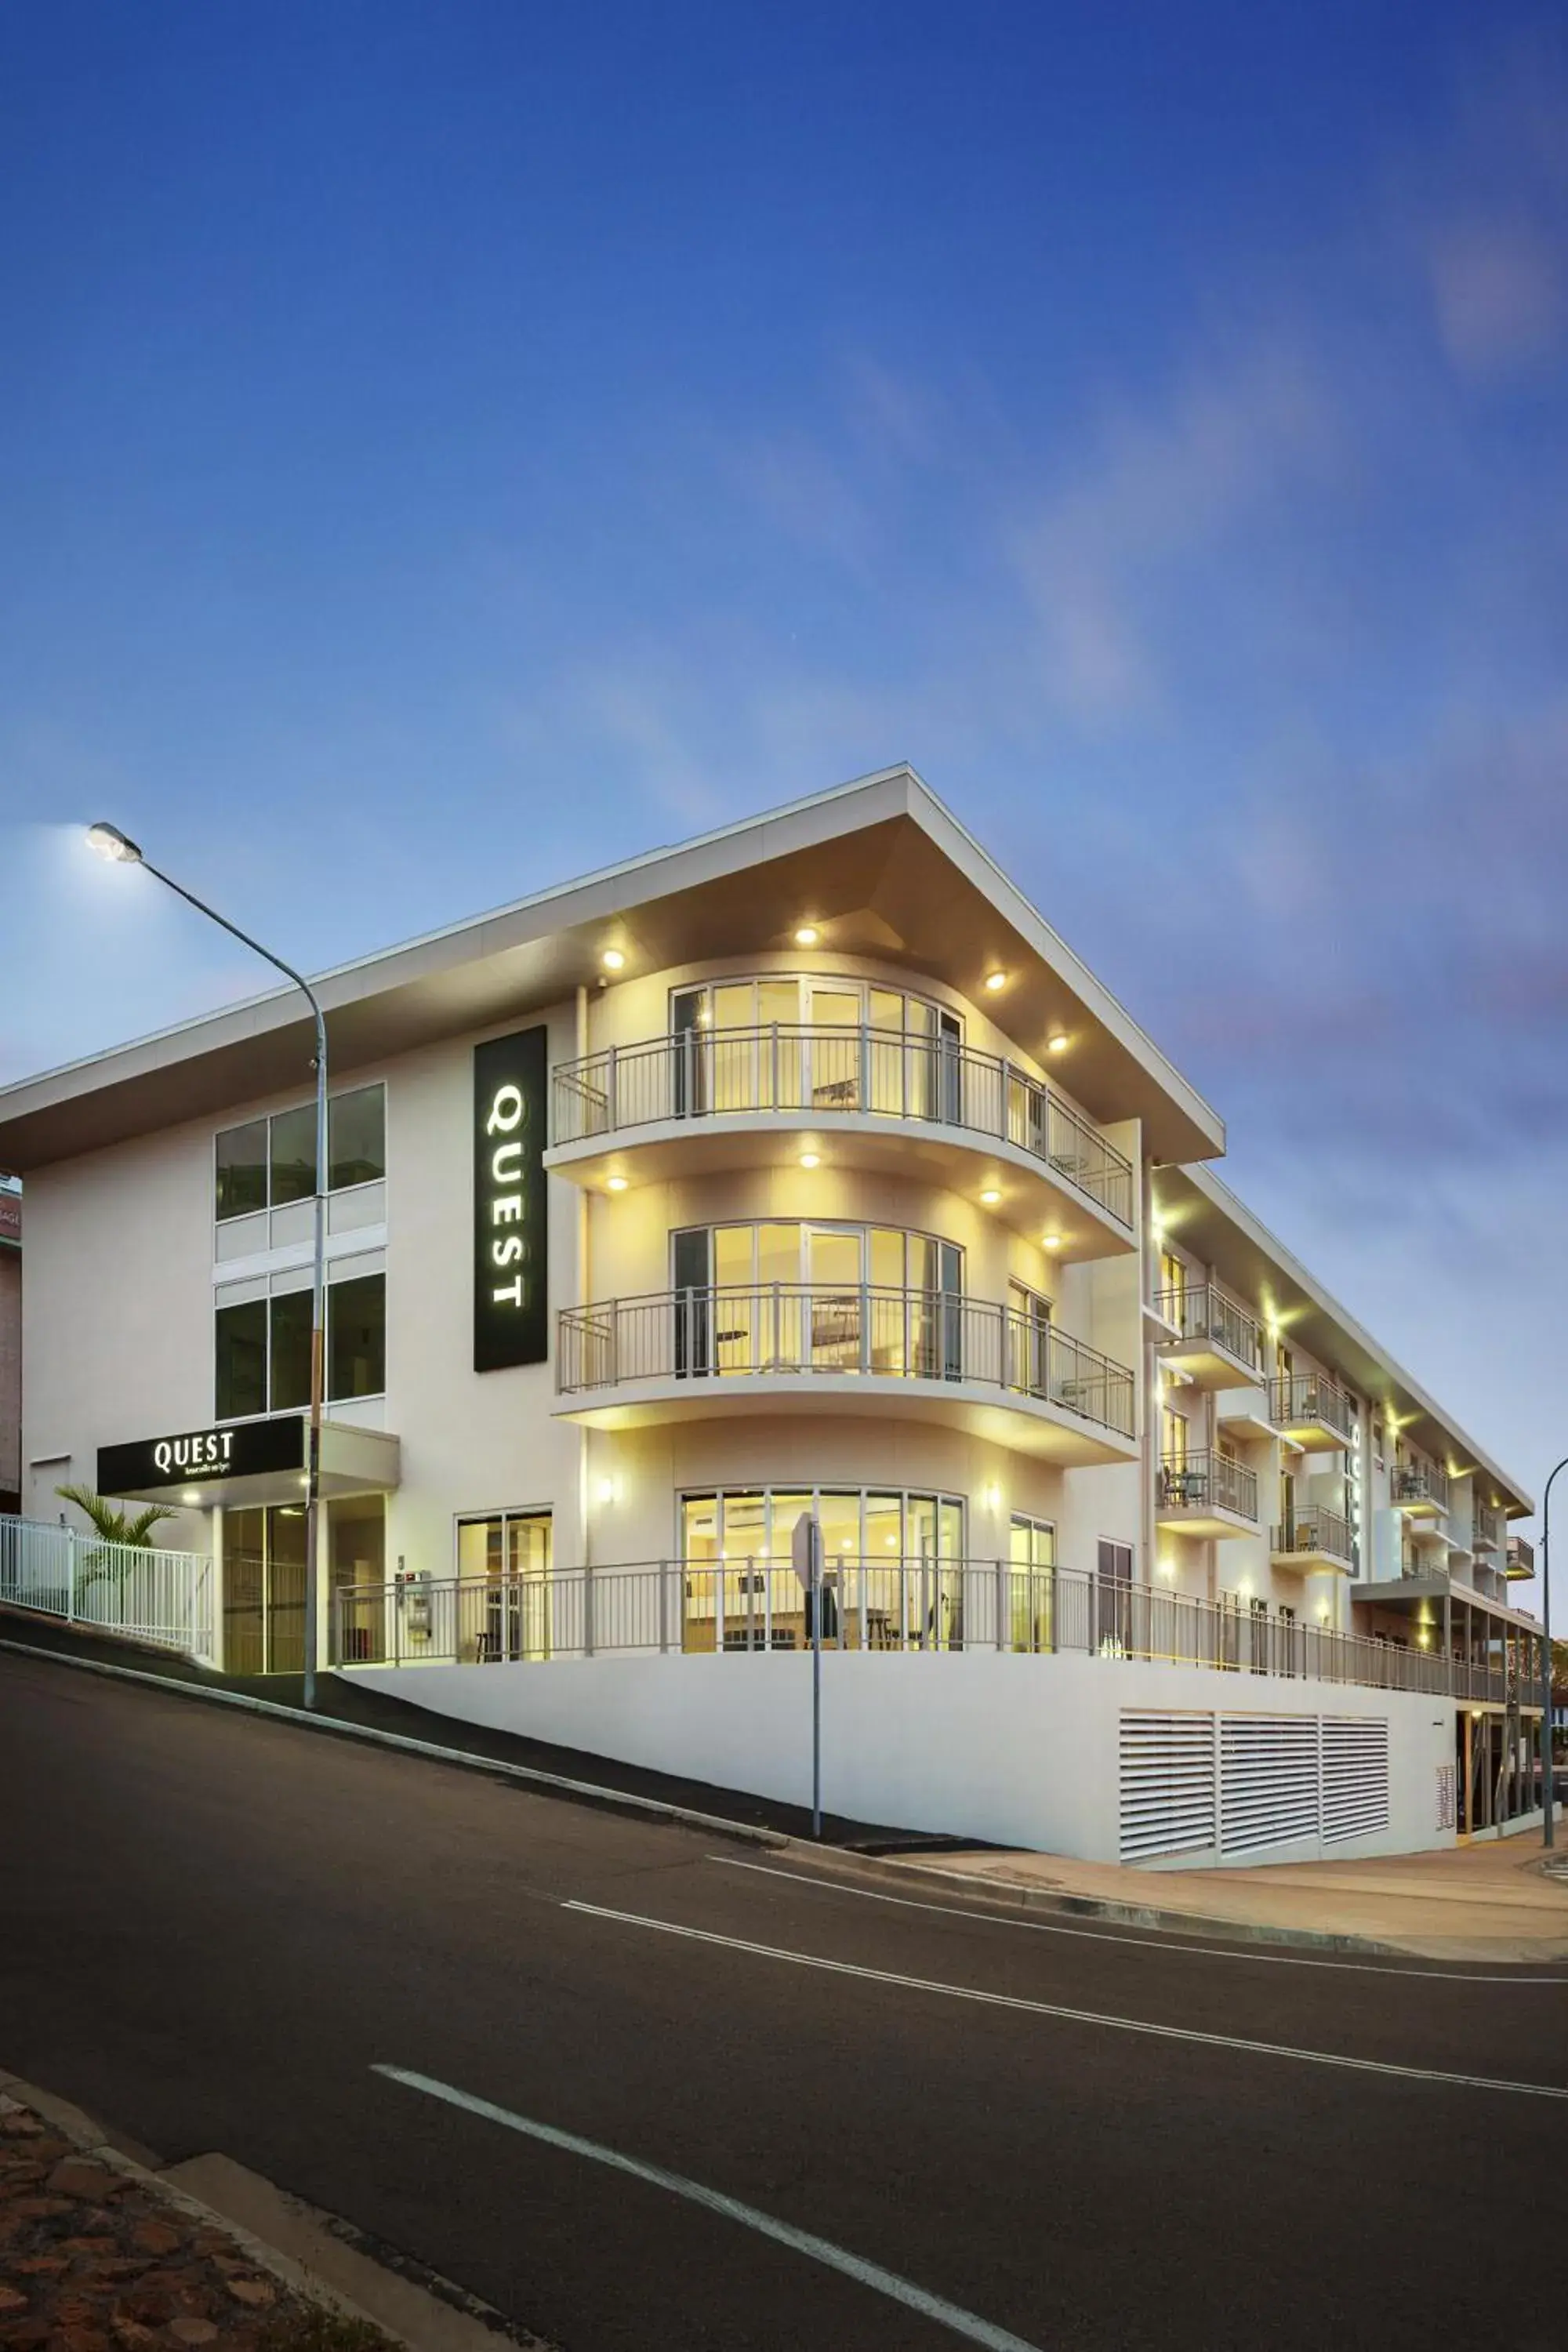 Property Building in Quest Townsville on Eyre